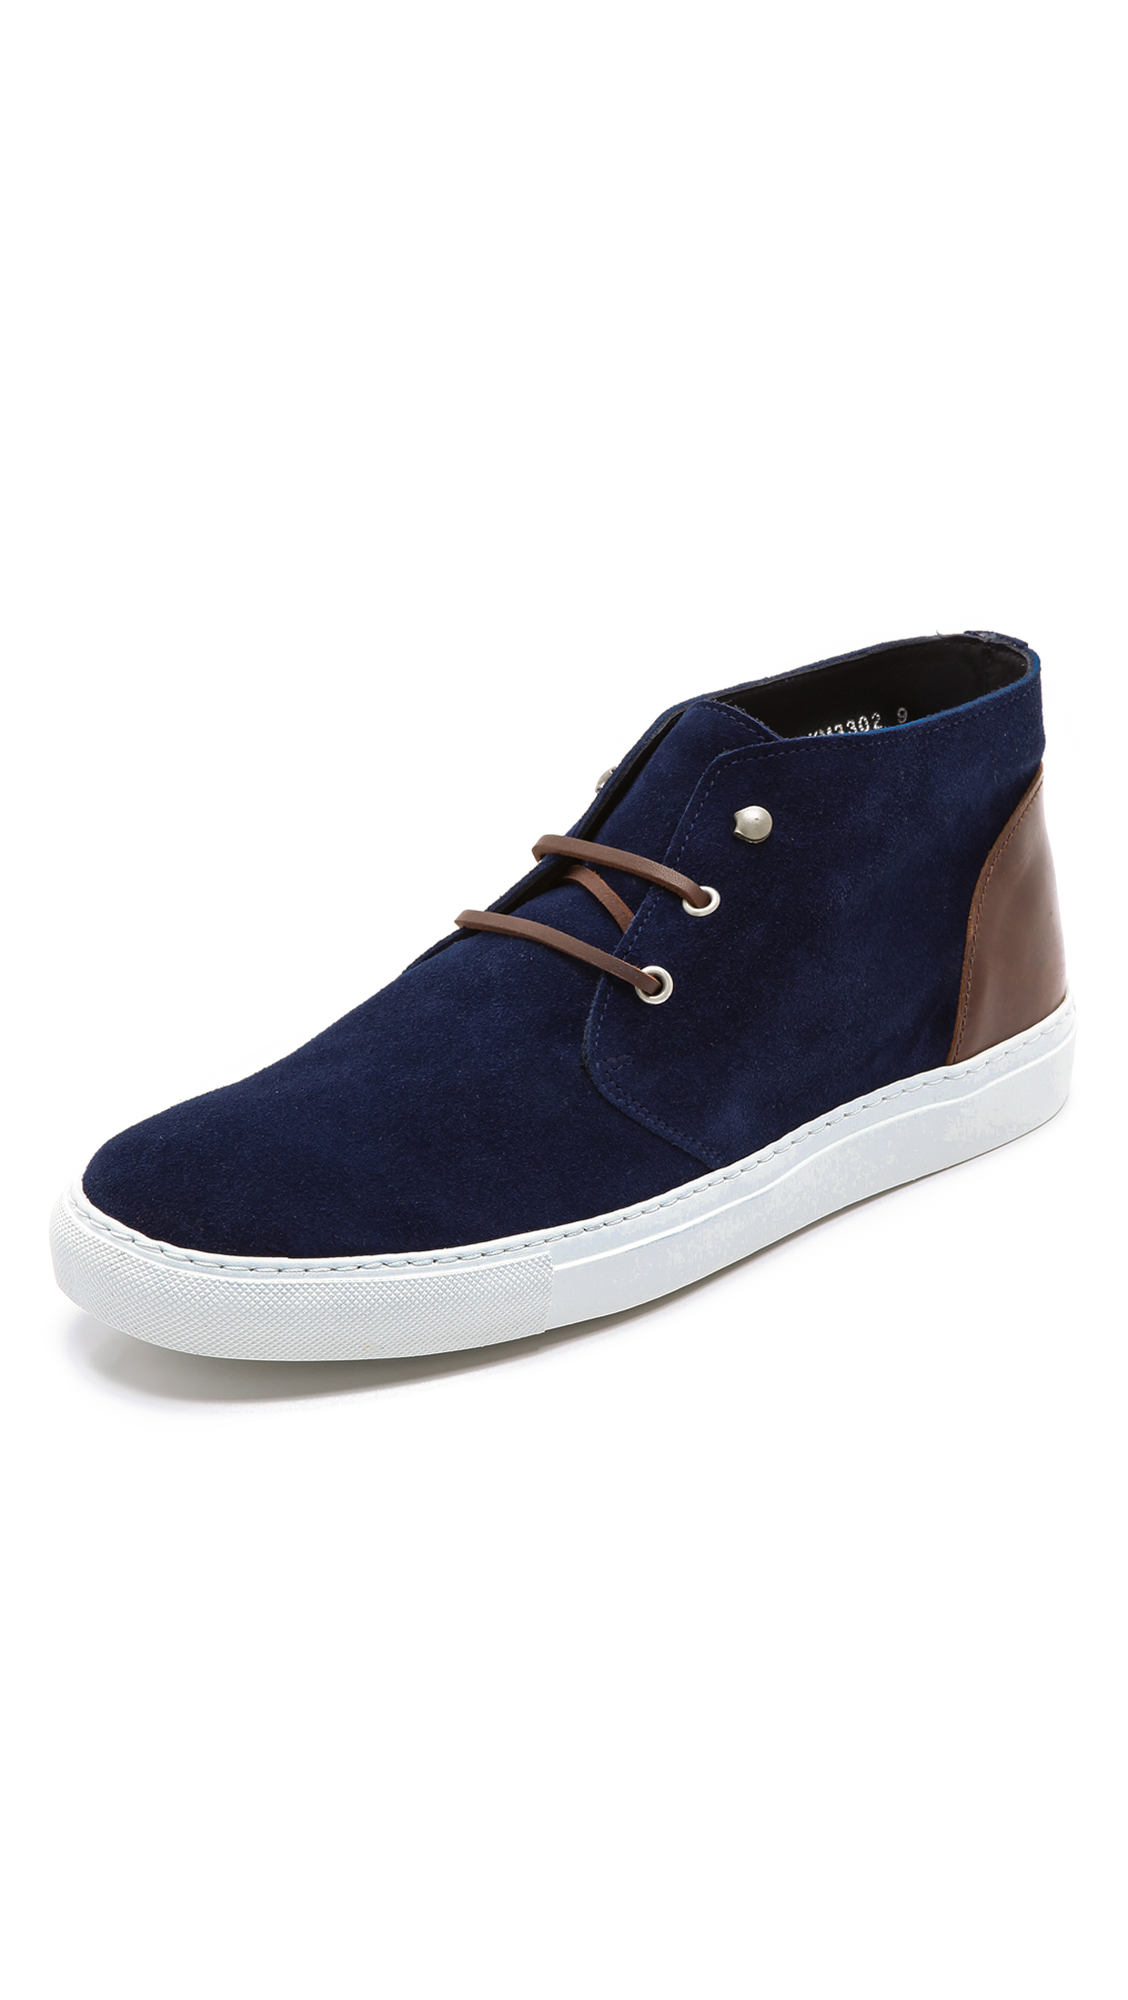 Lyst - The Generic Man Chuckman Sneakers in Blue for Men